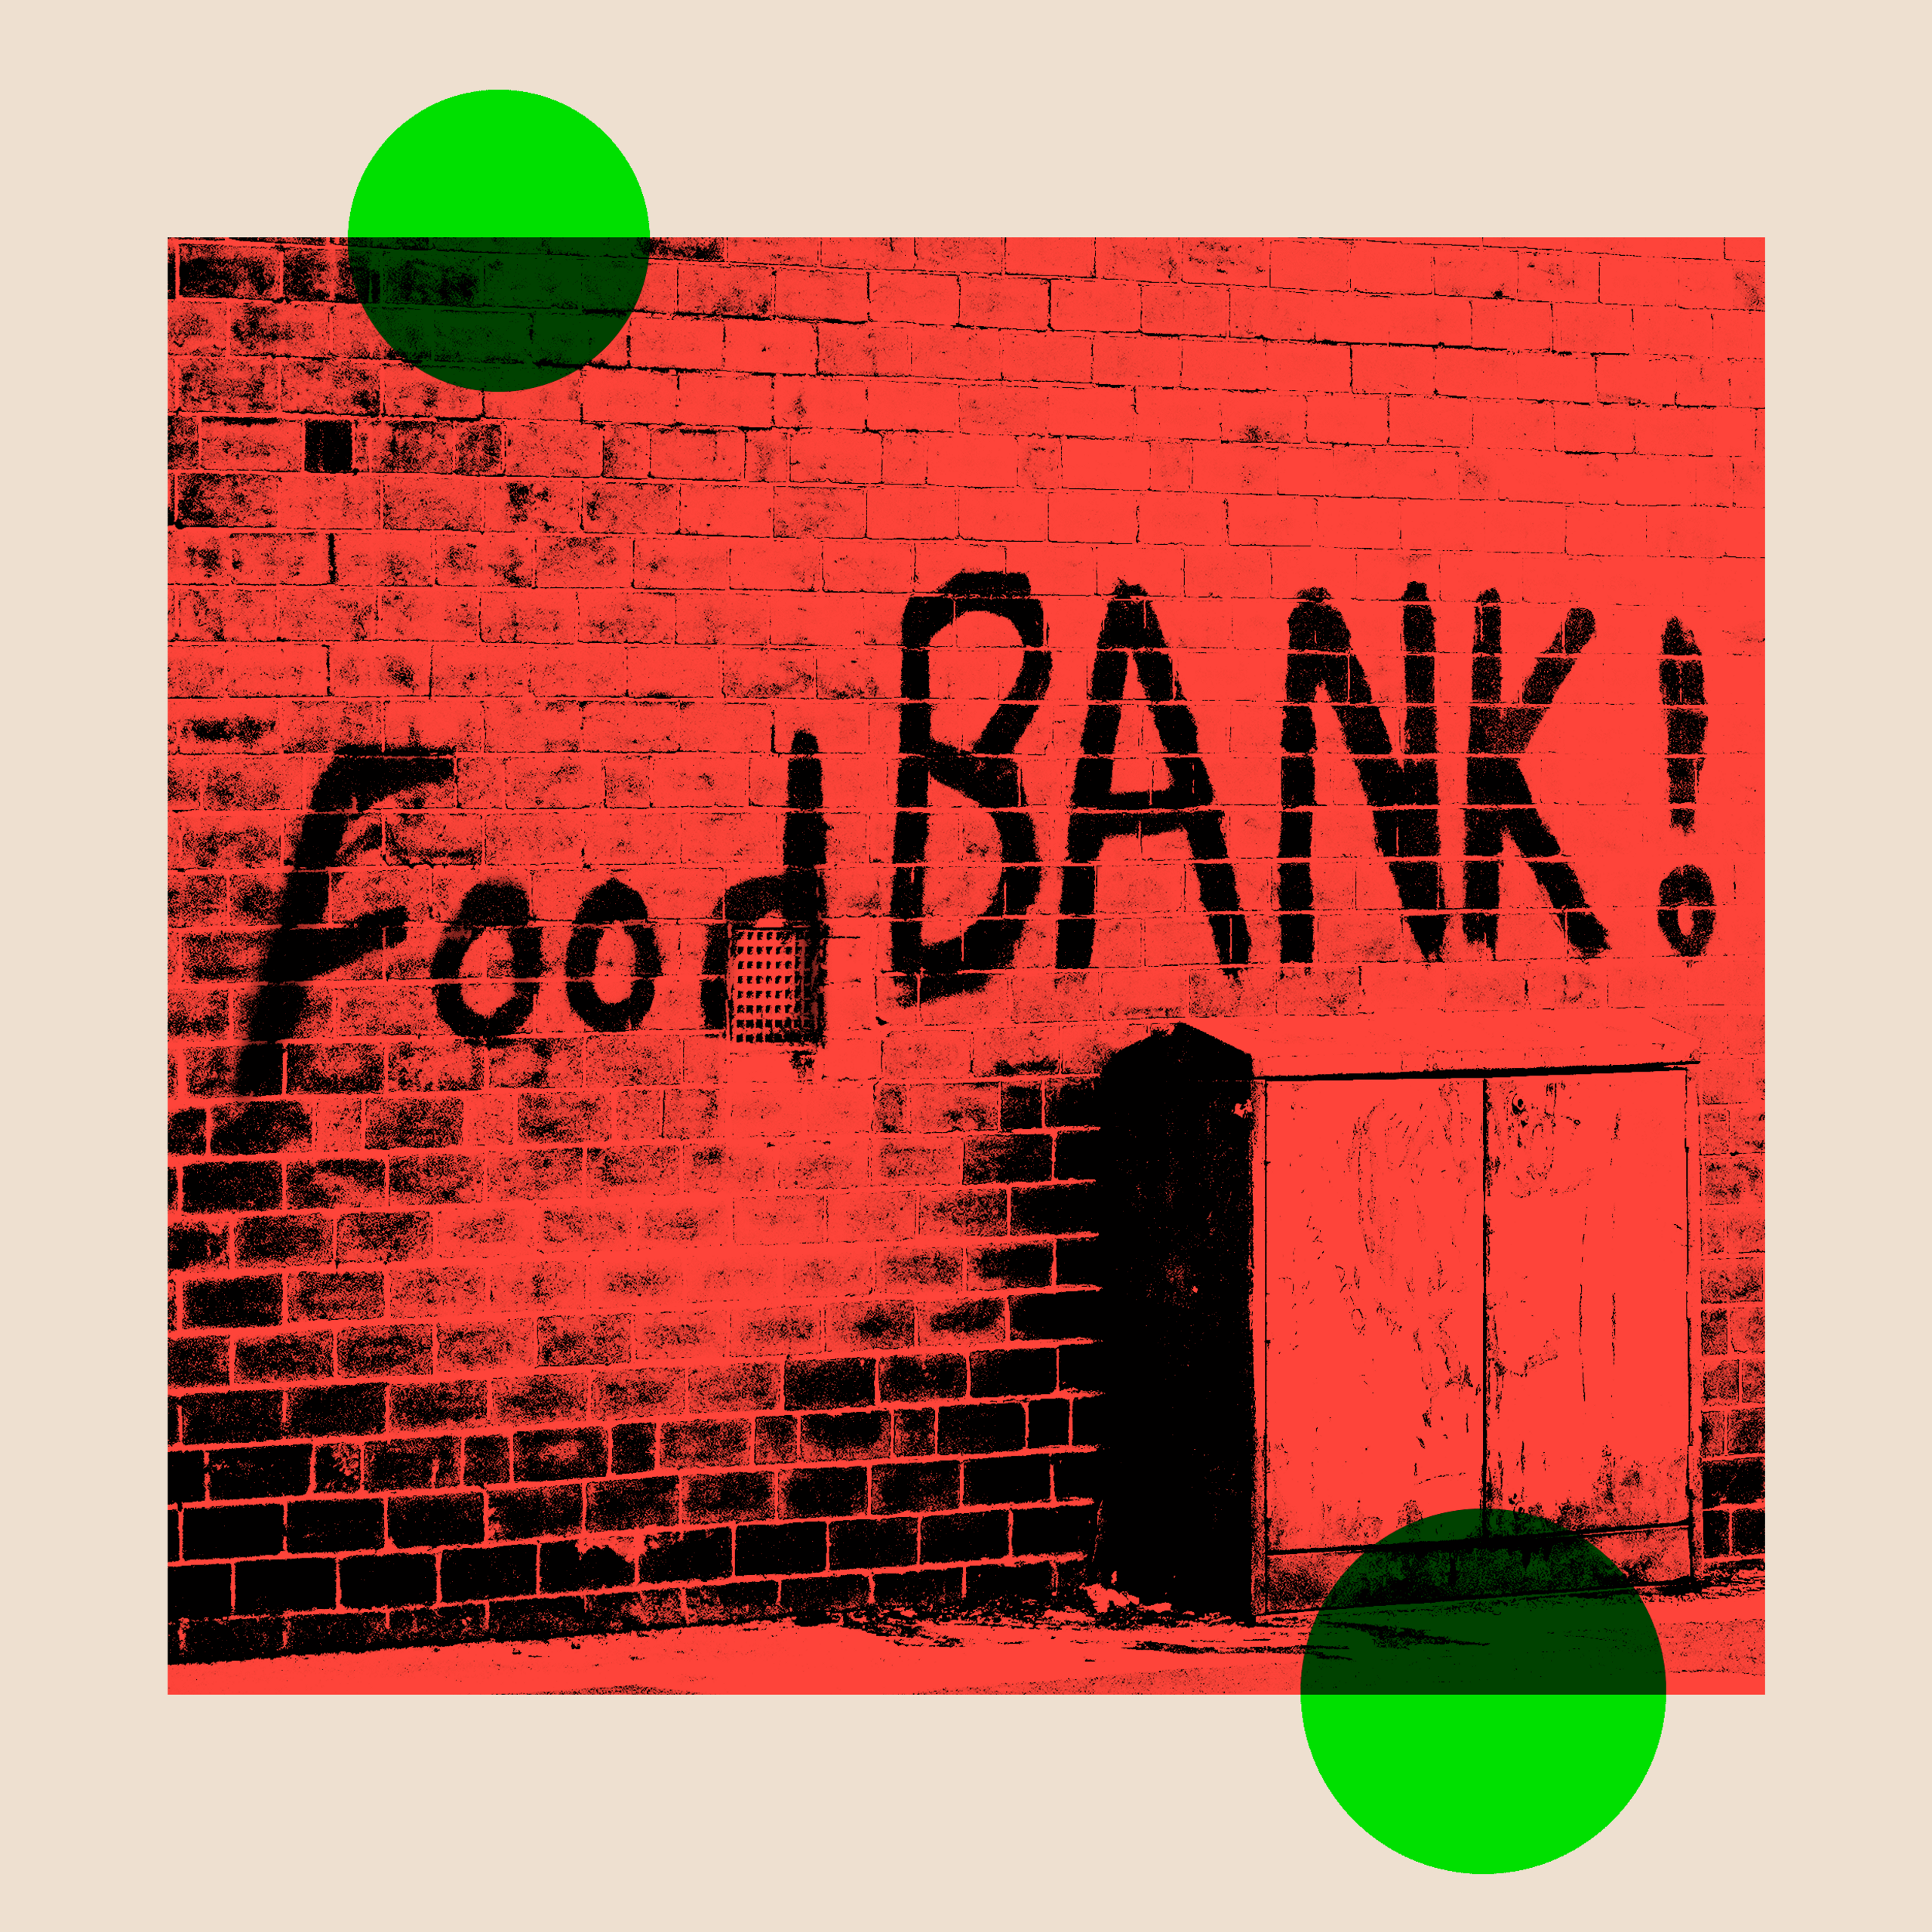 A wall with the words "Food Bank" written on it